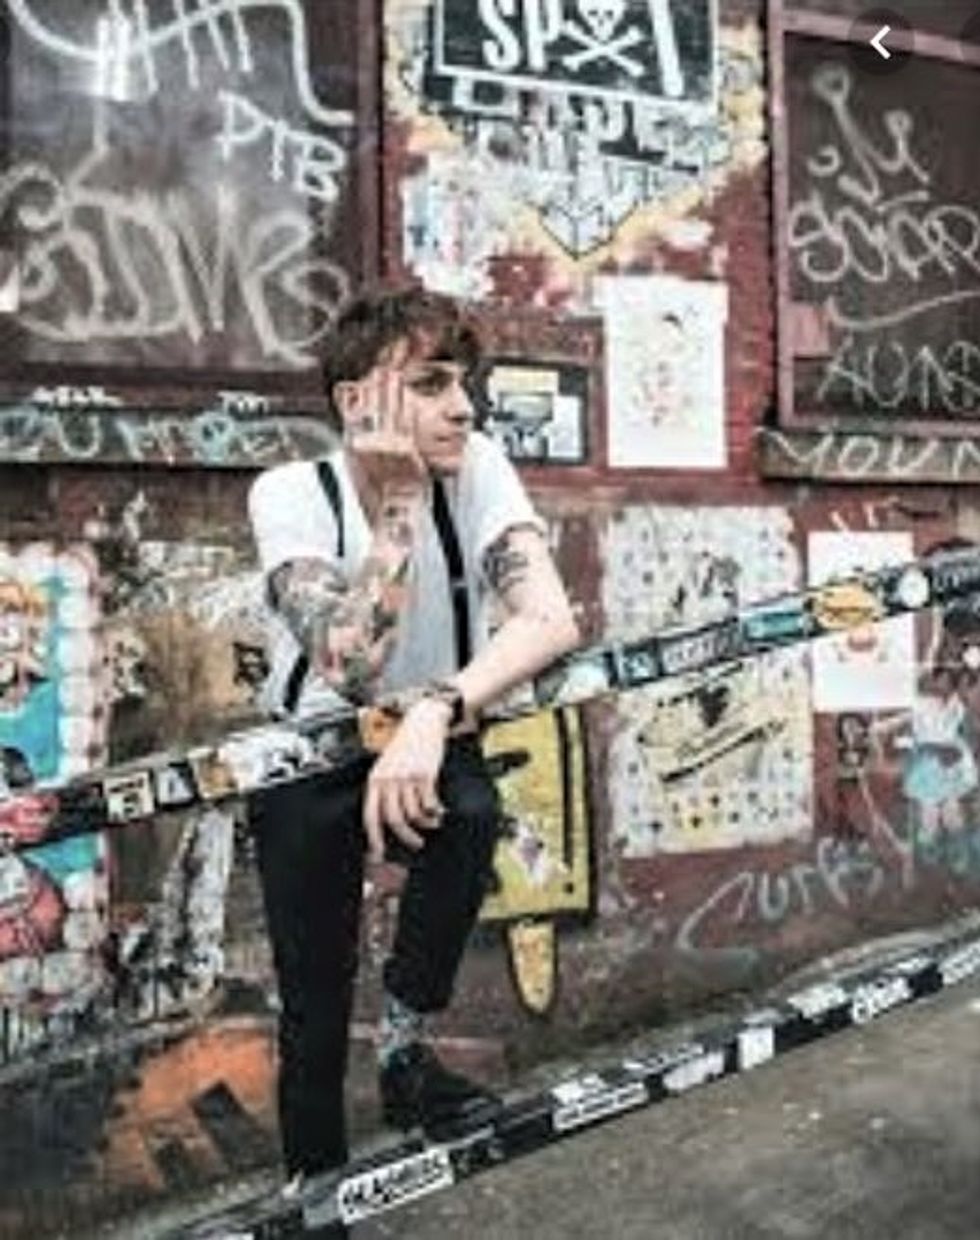 Scott Helman Creating Mural, Releasing Song About Climate Crisis